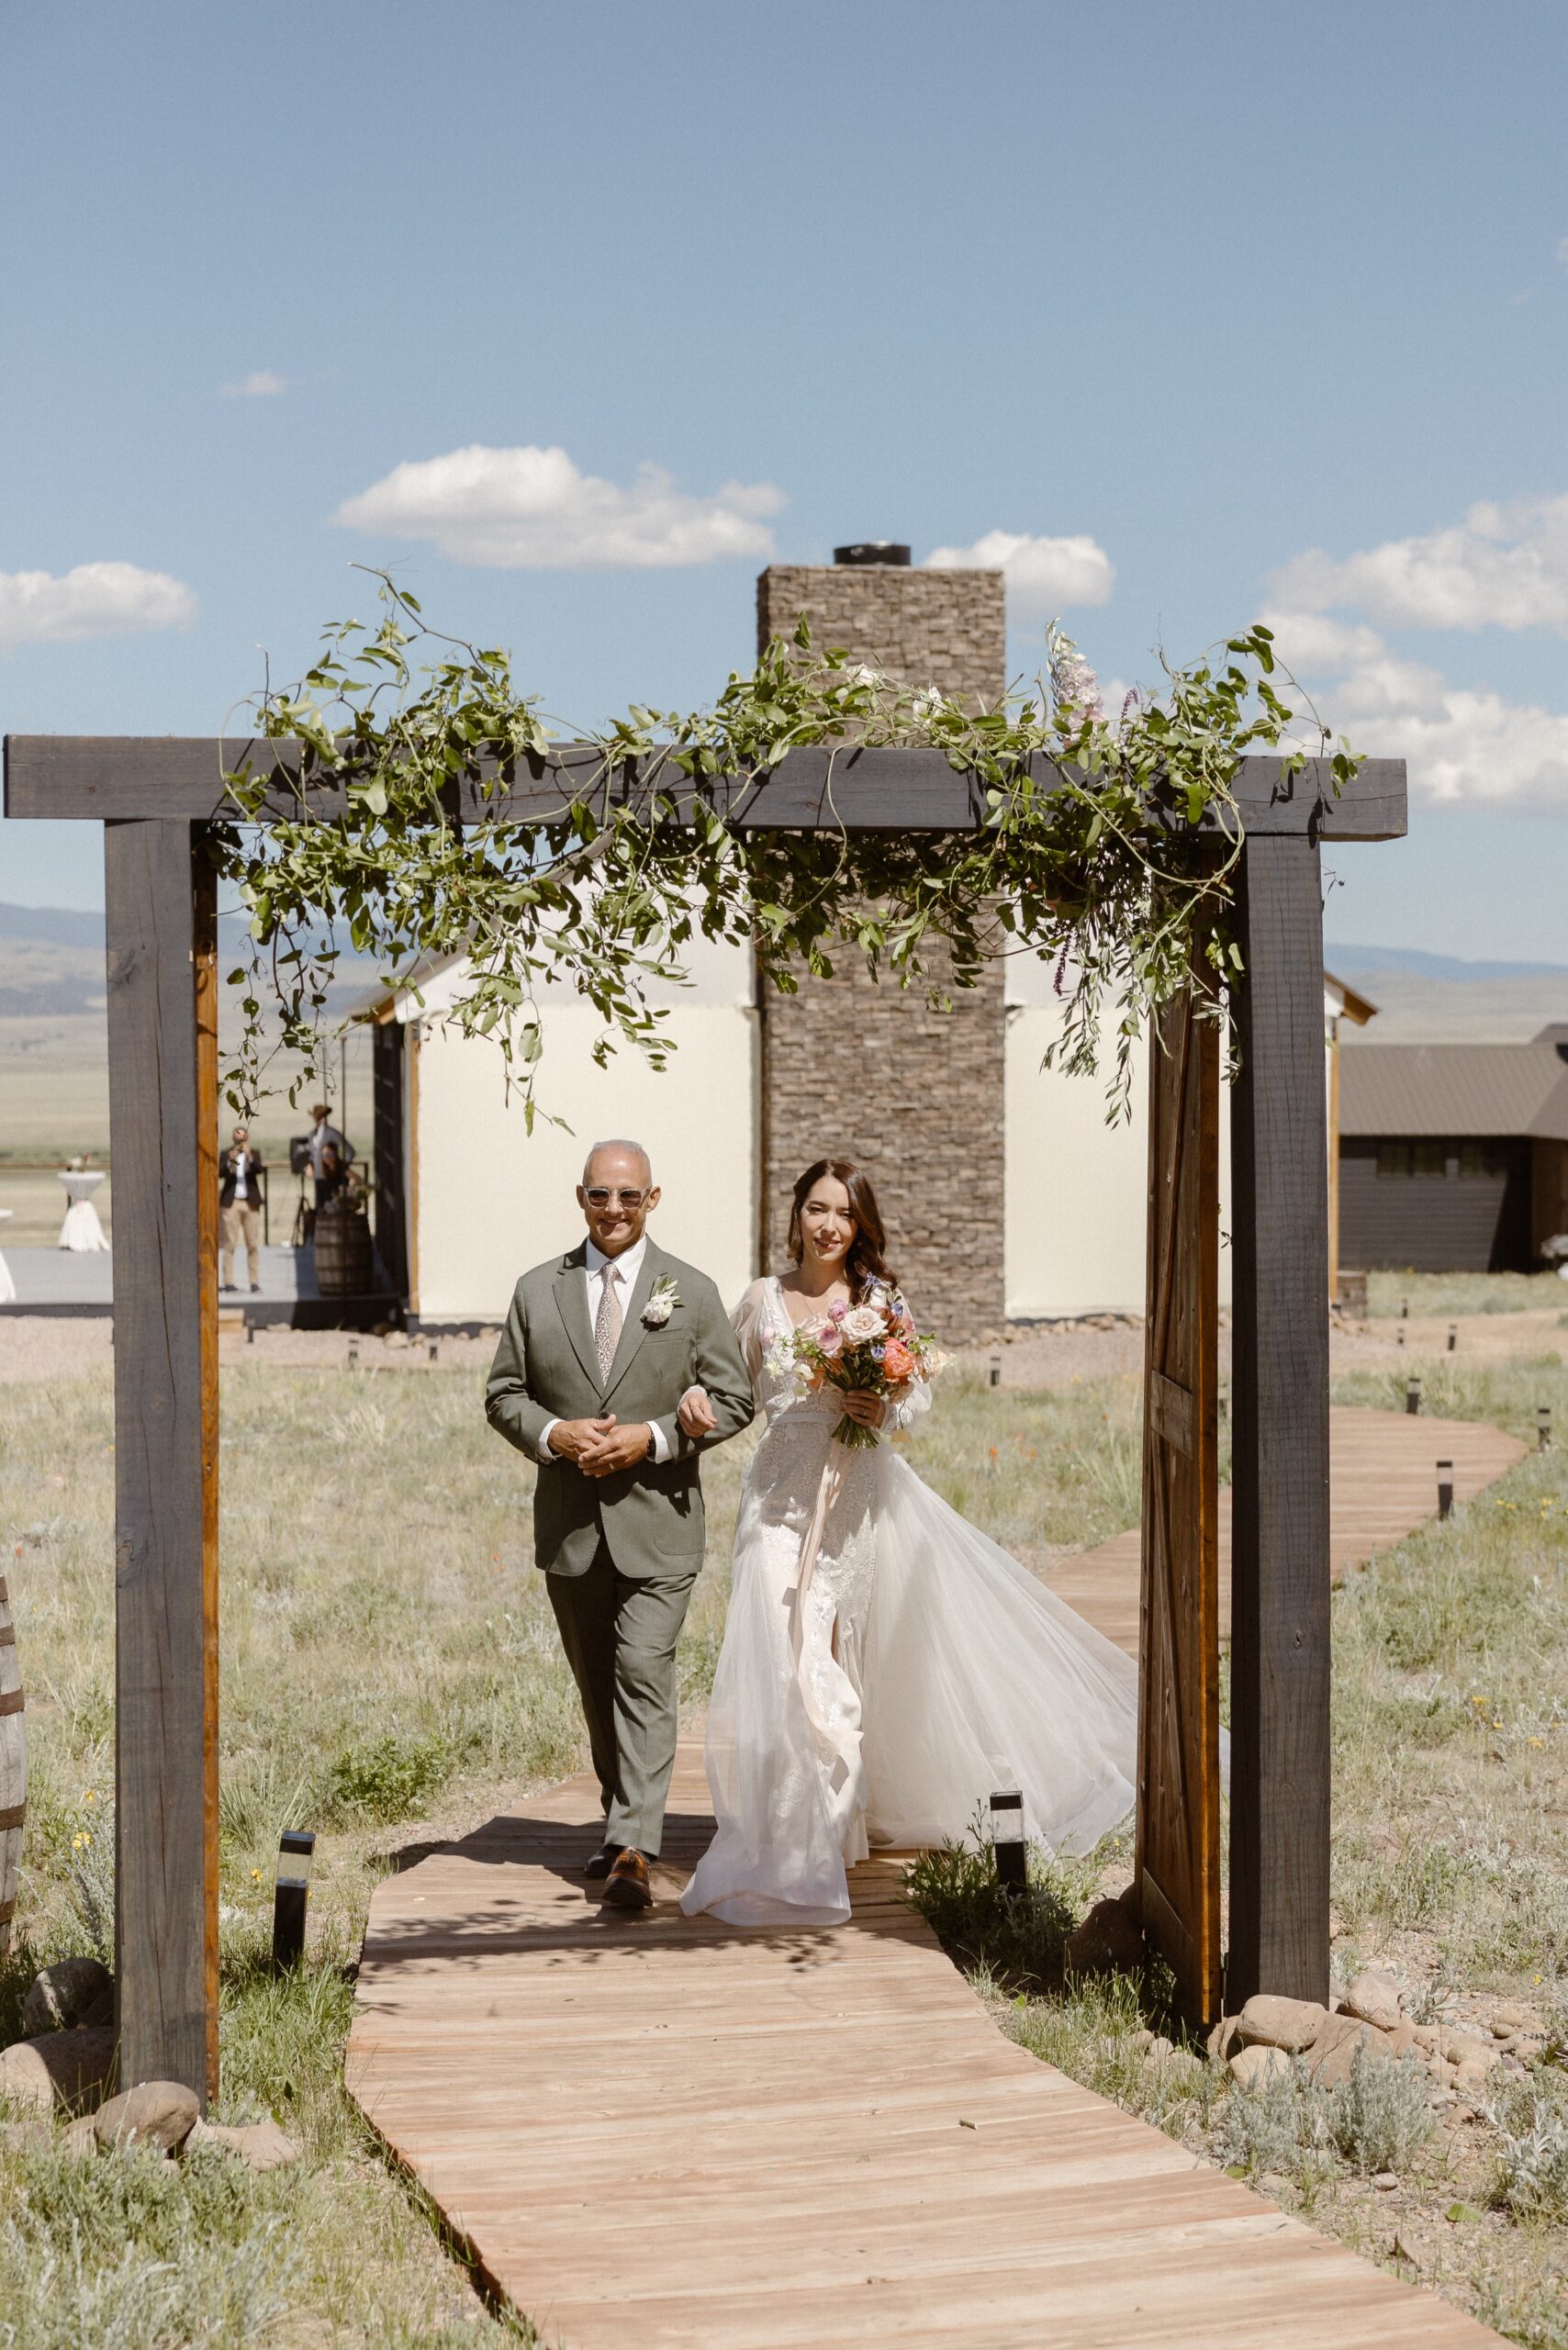 A bride and her father walk along a wooden path to the wedding ceremony location at Three Peaks Ranch. Photo by Colorado wedding photographer Ashley Joyce.